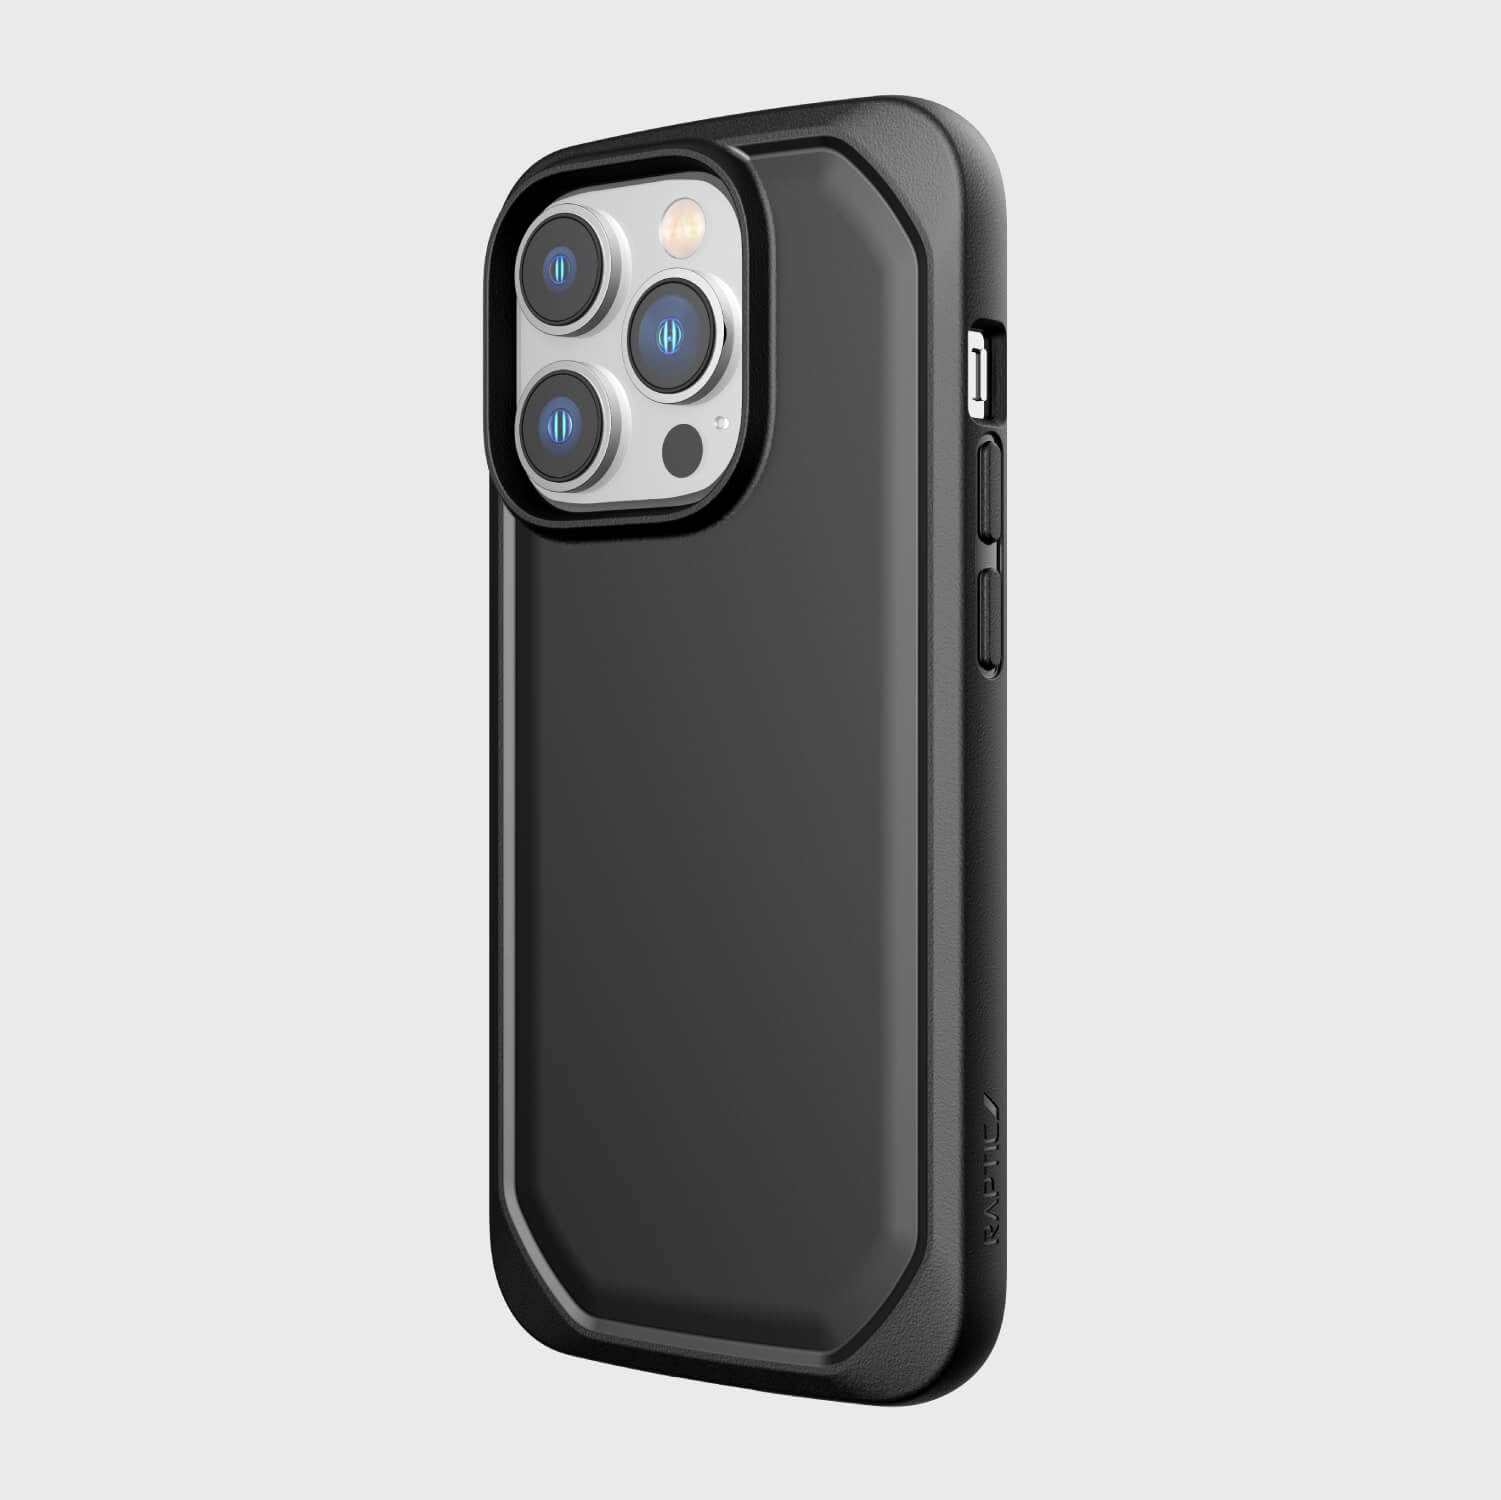 The back of the black iPhone 14 Pro Case - Raptic Slim & Sleek showcases its slim design and recyclable material.